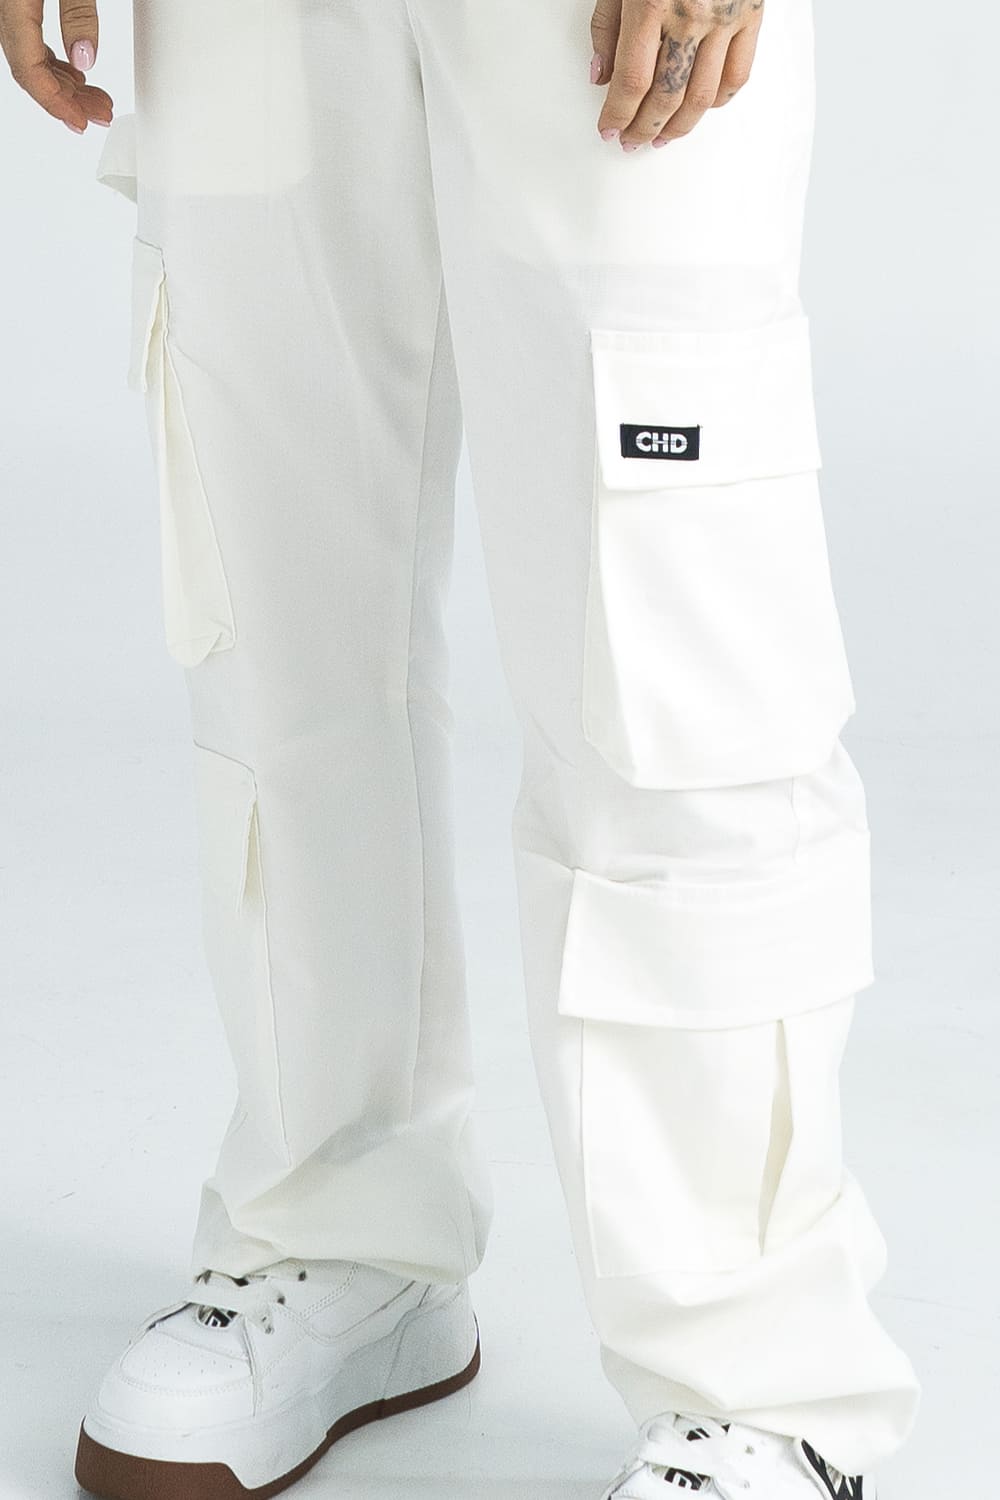 BCO 2.0 Double Cargo pants IVORY 8230